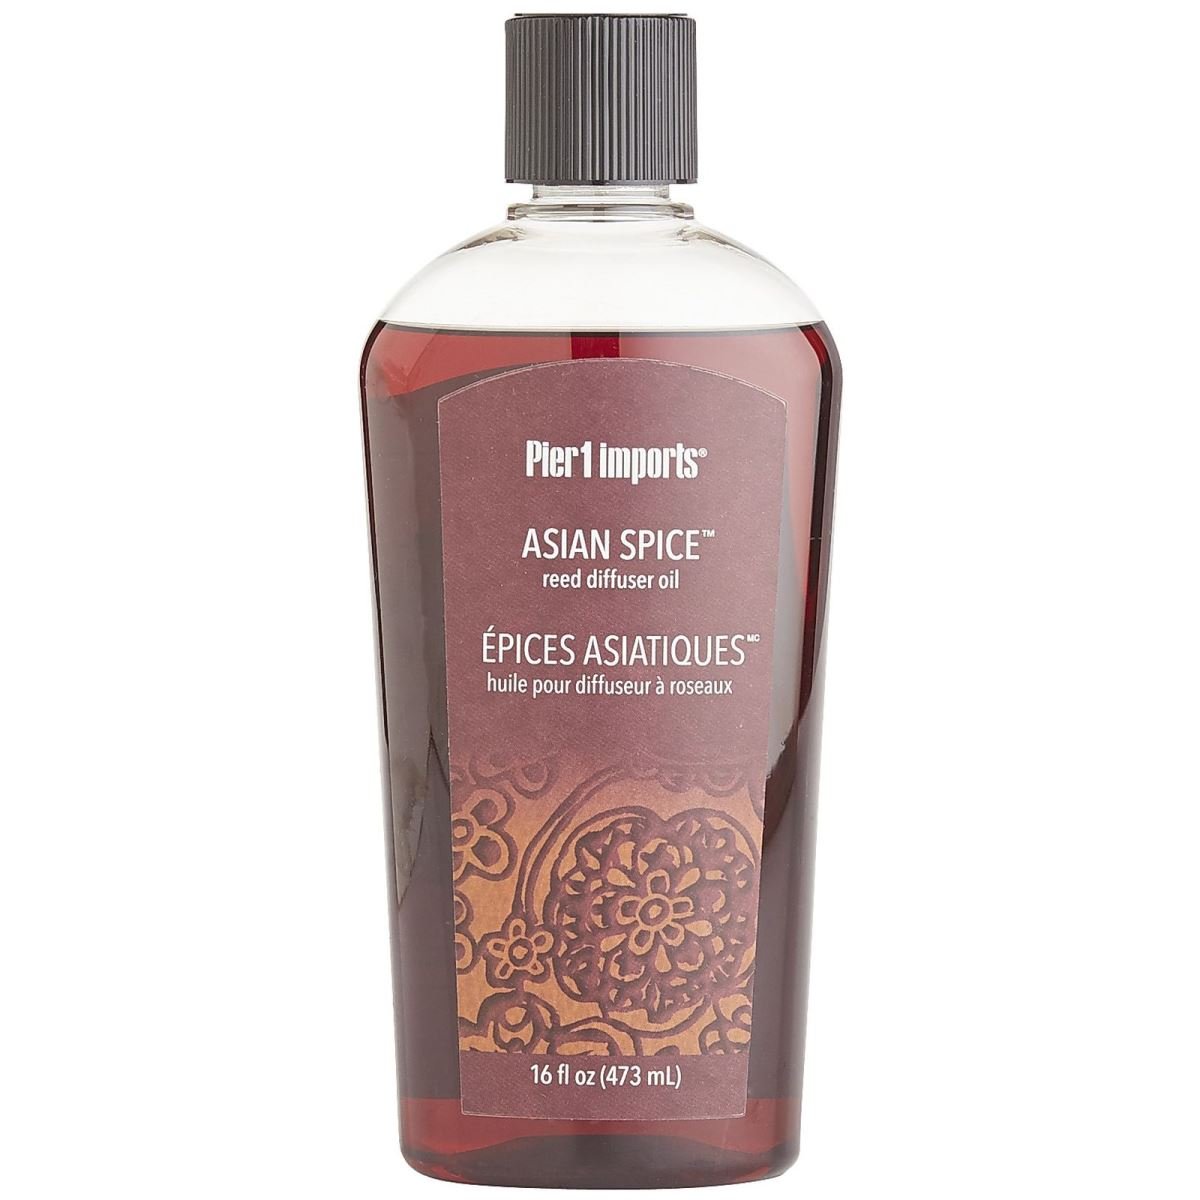 Aceite para Difusor Asian Spice Pier 1 Imports